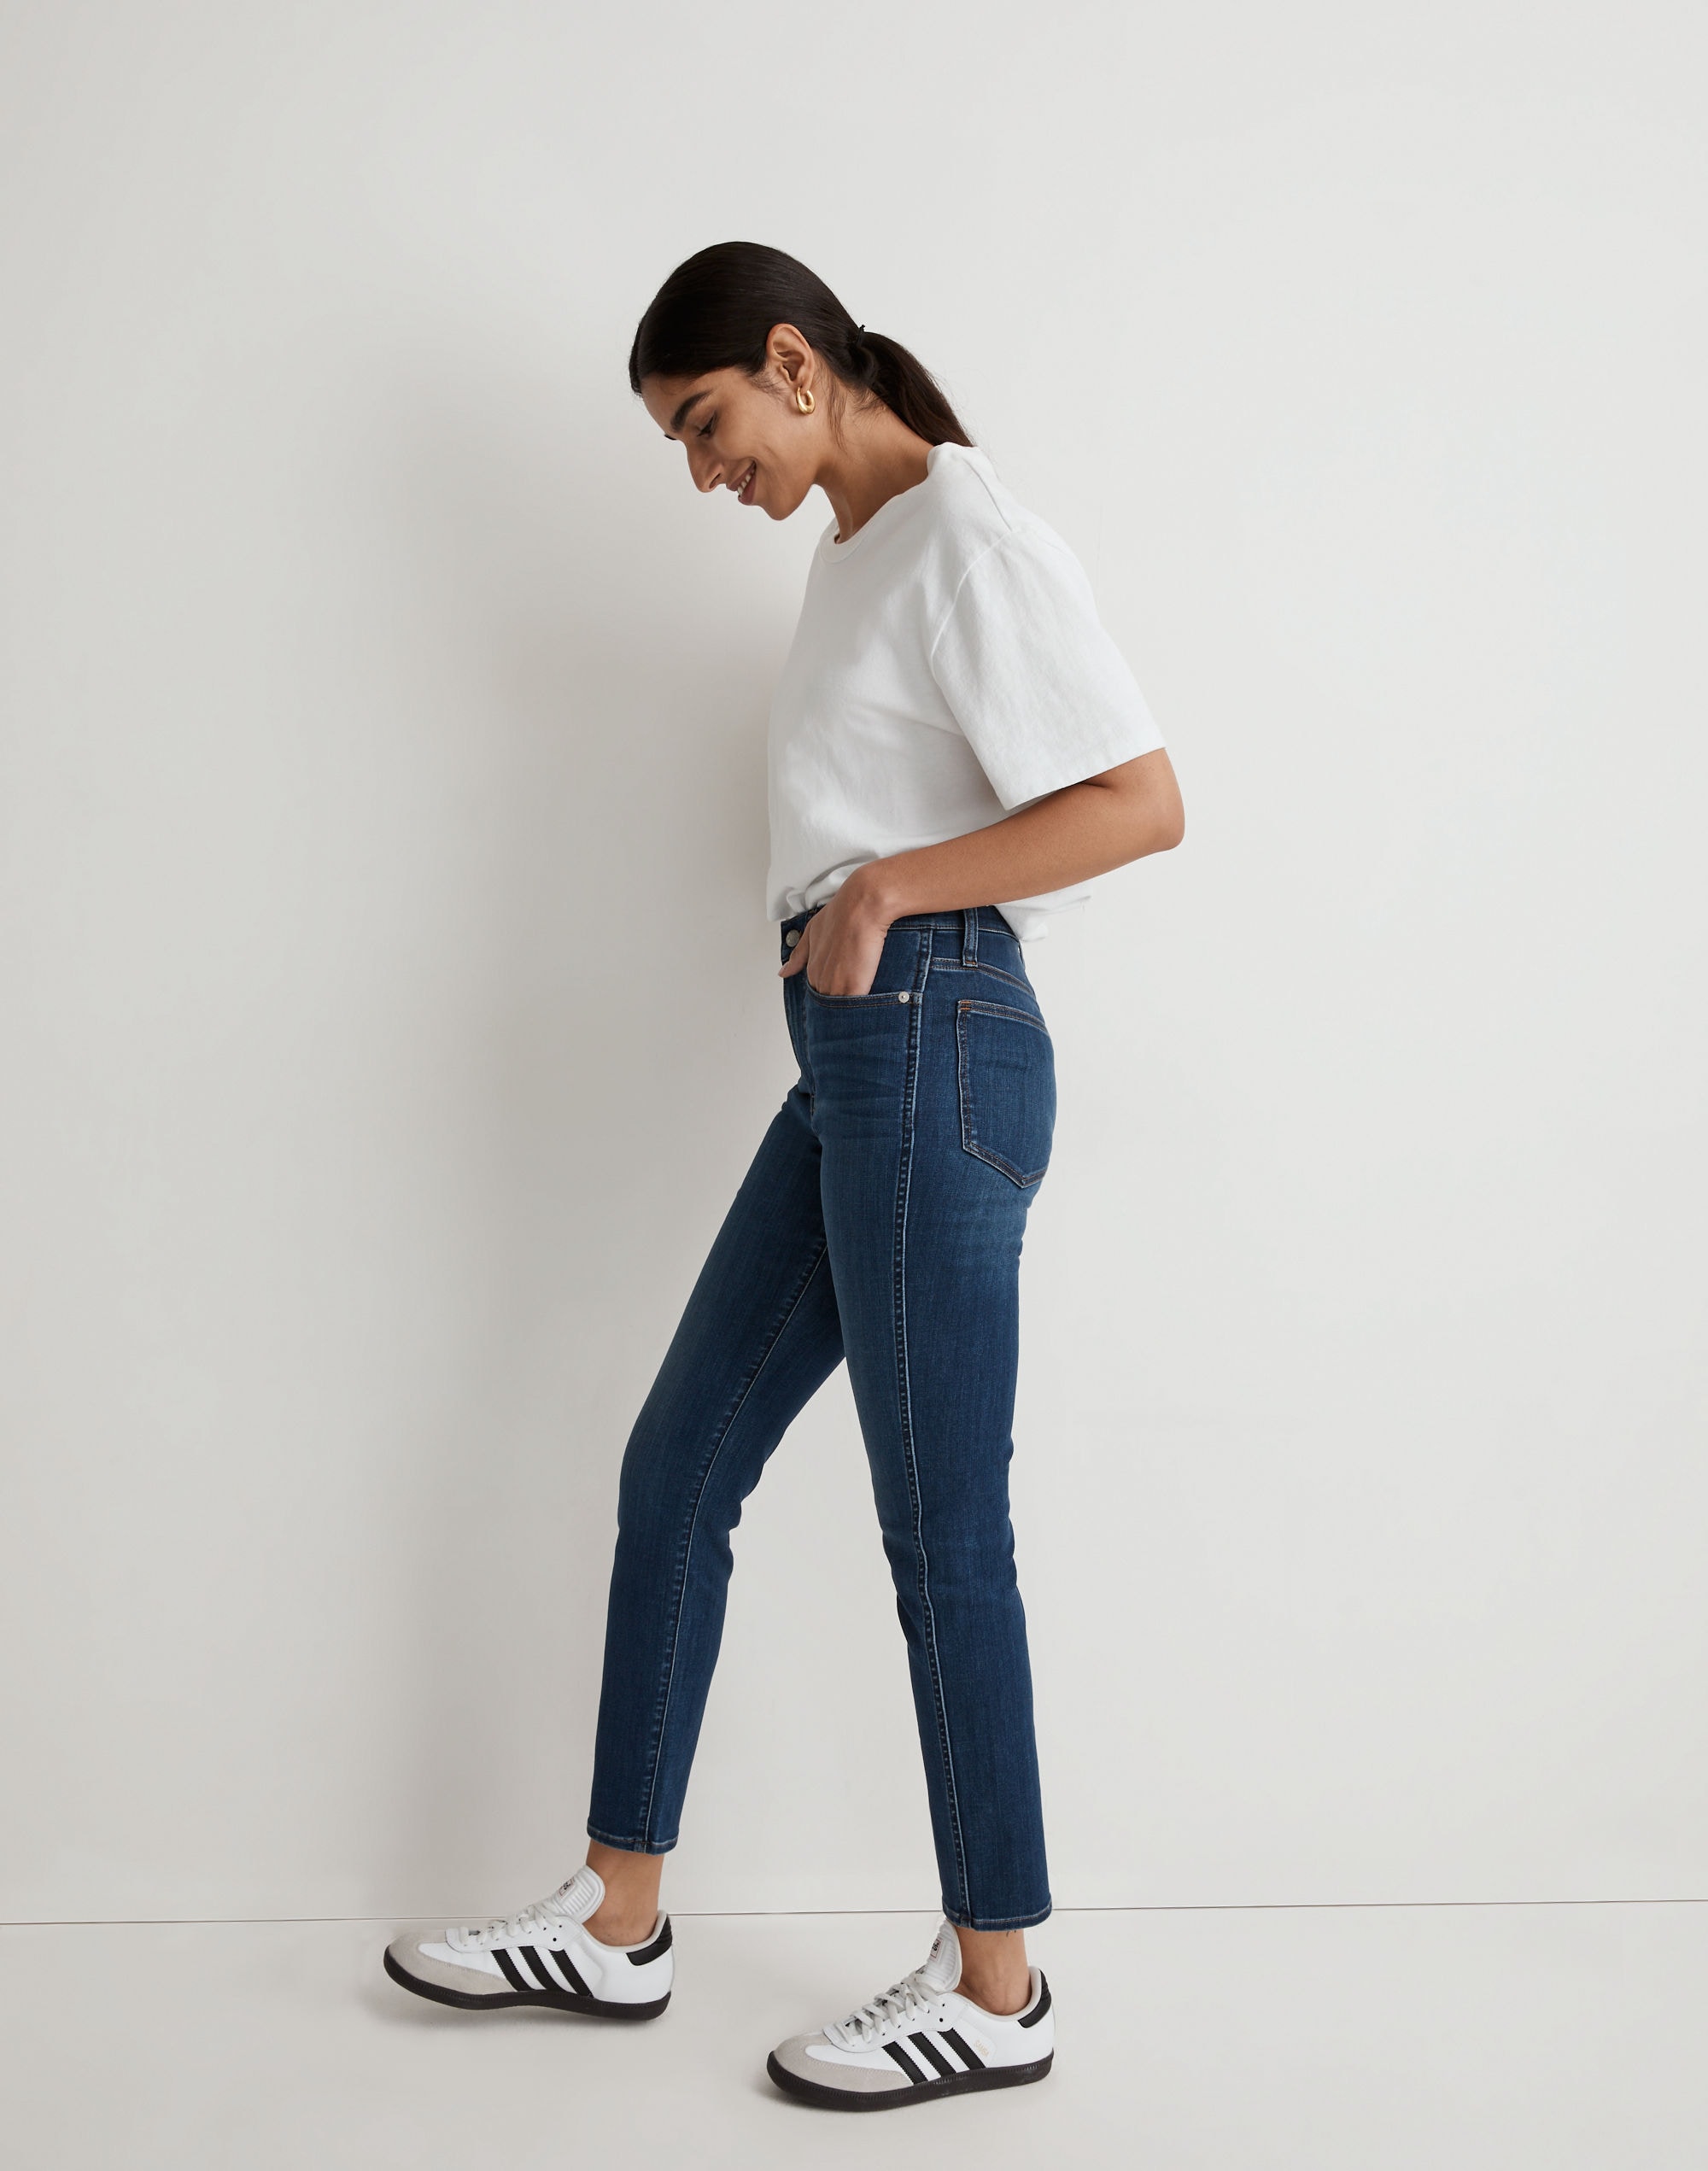 Tall Stovepipe Jeans in Brentside Wash